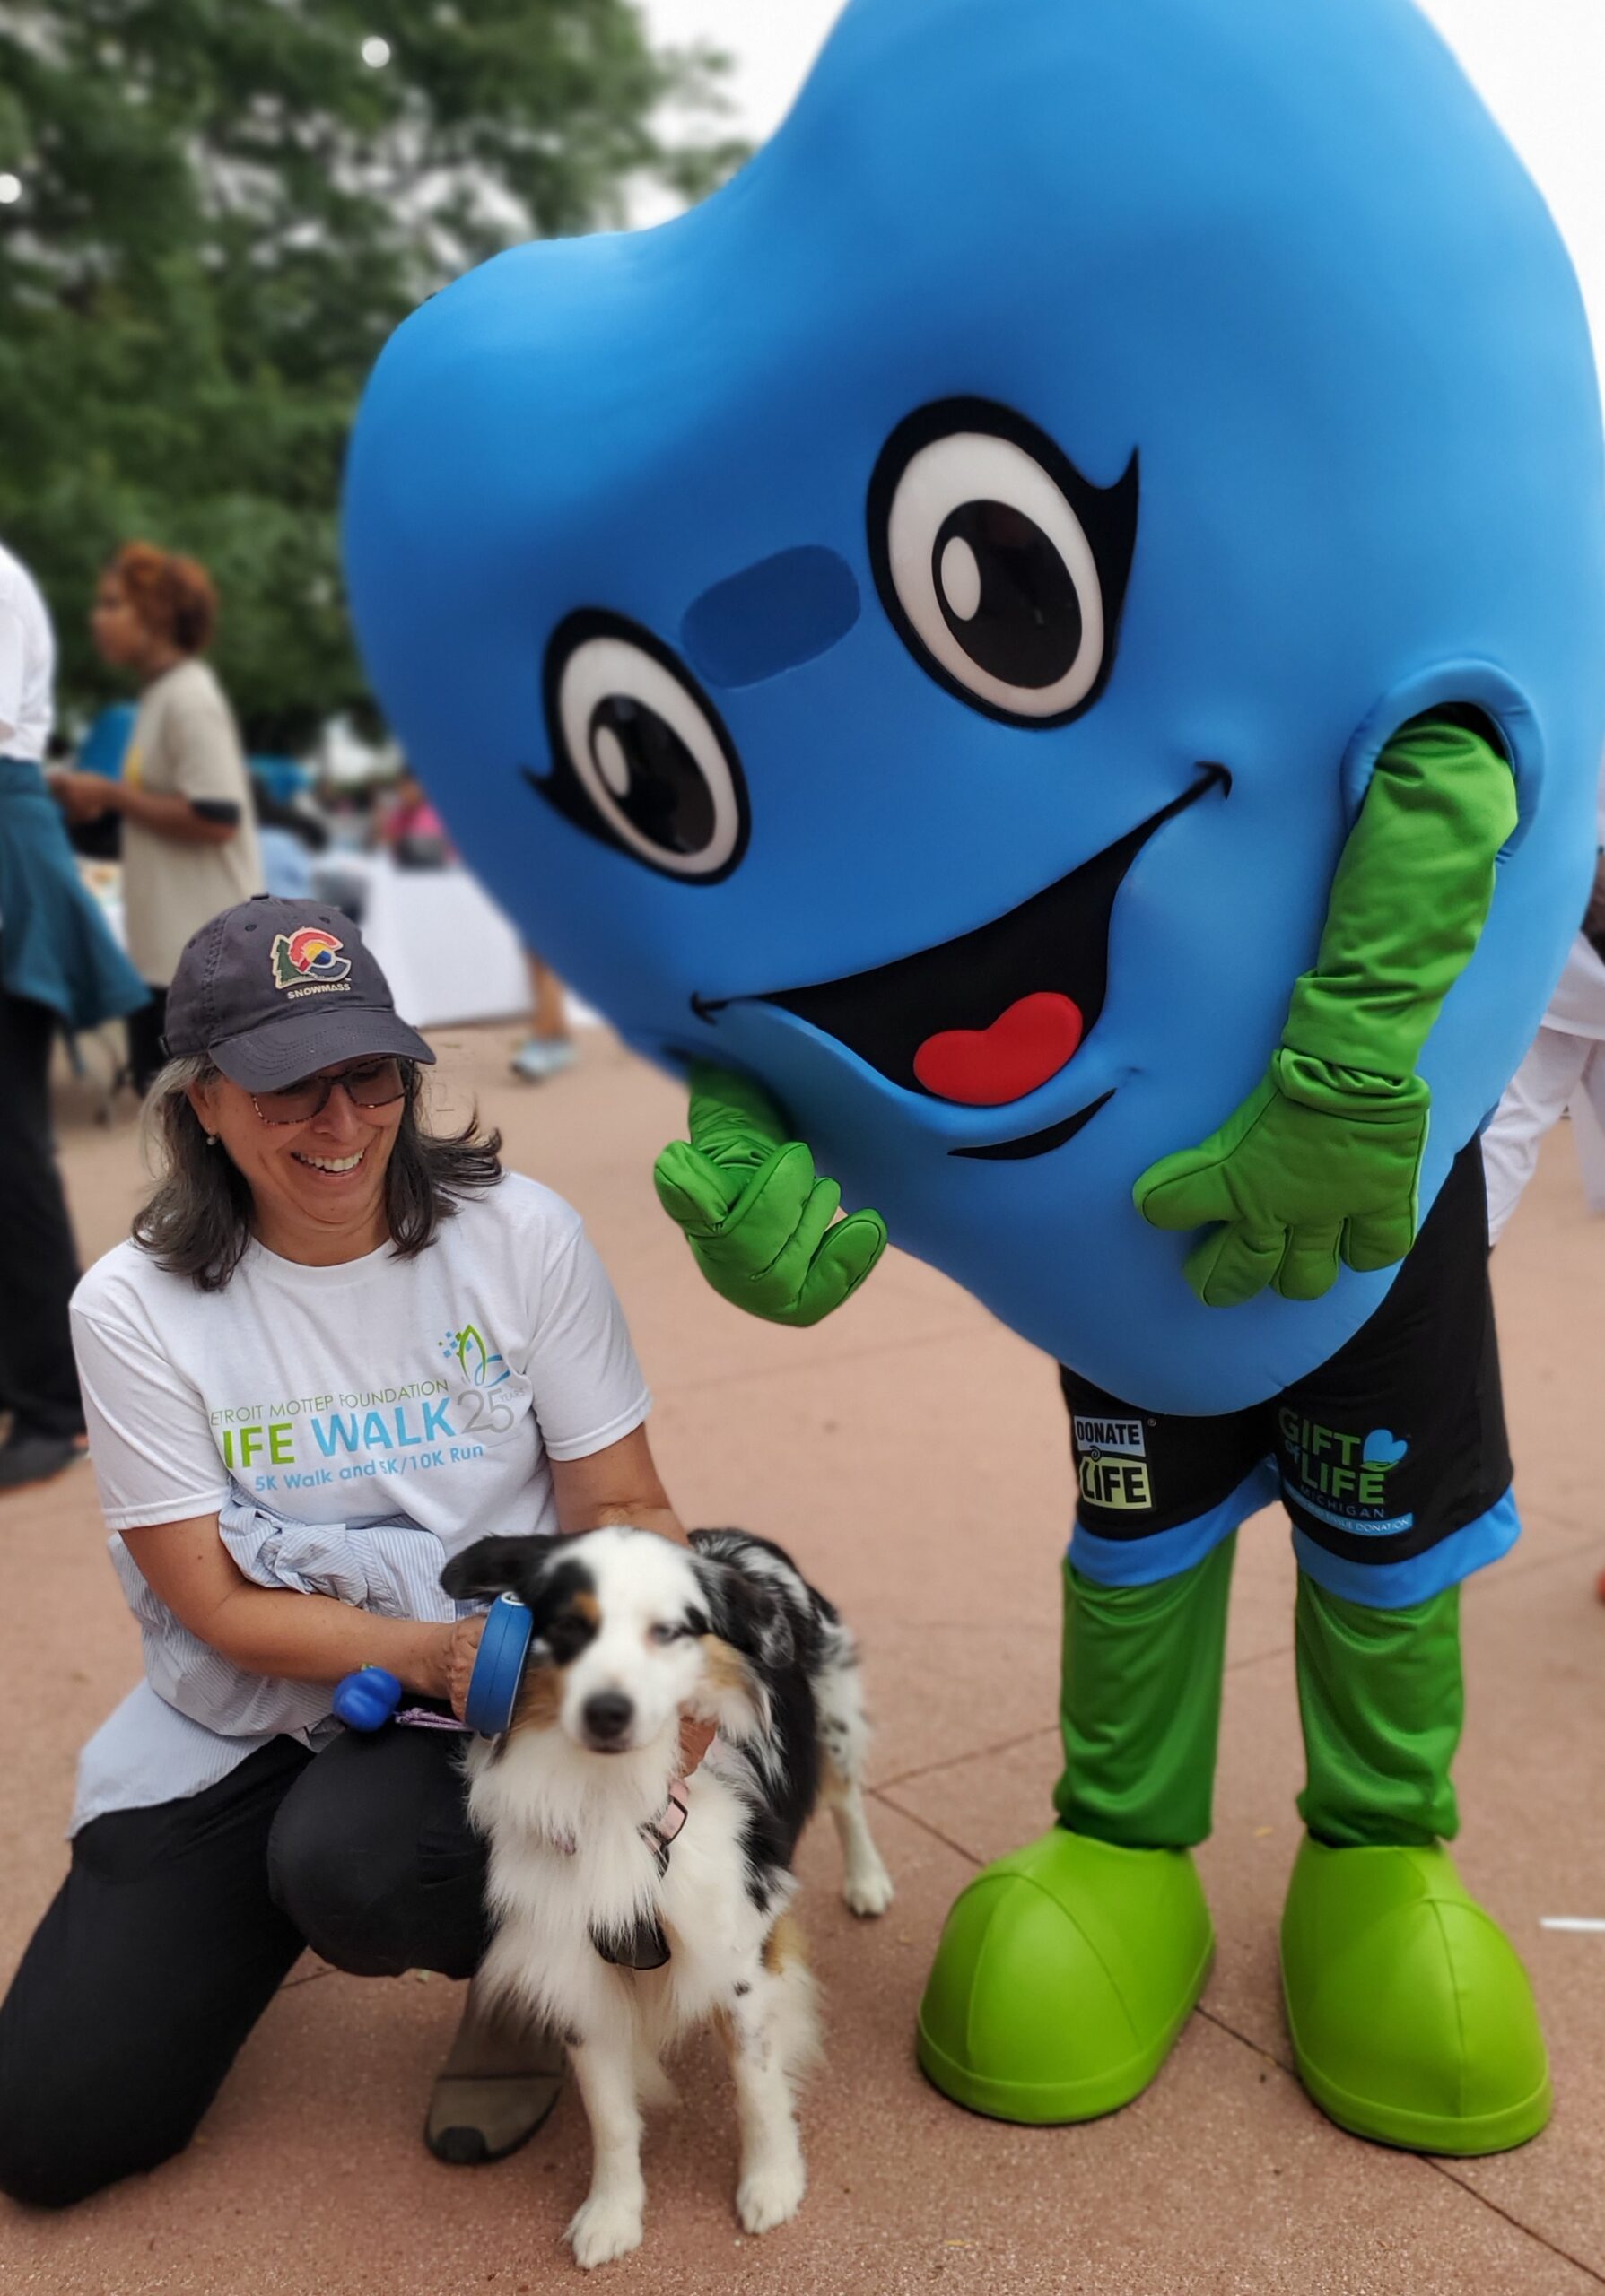 Gift of Life's mascot Hartley standing next to a woman and her dog.